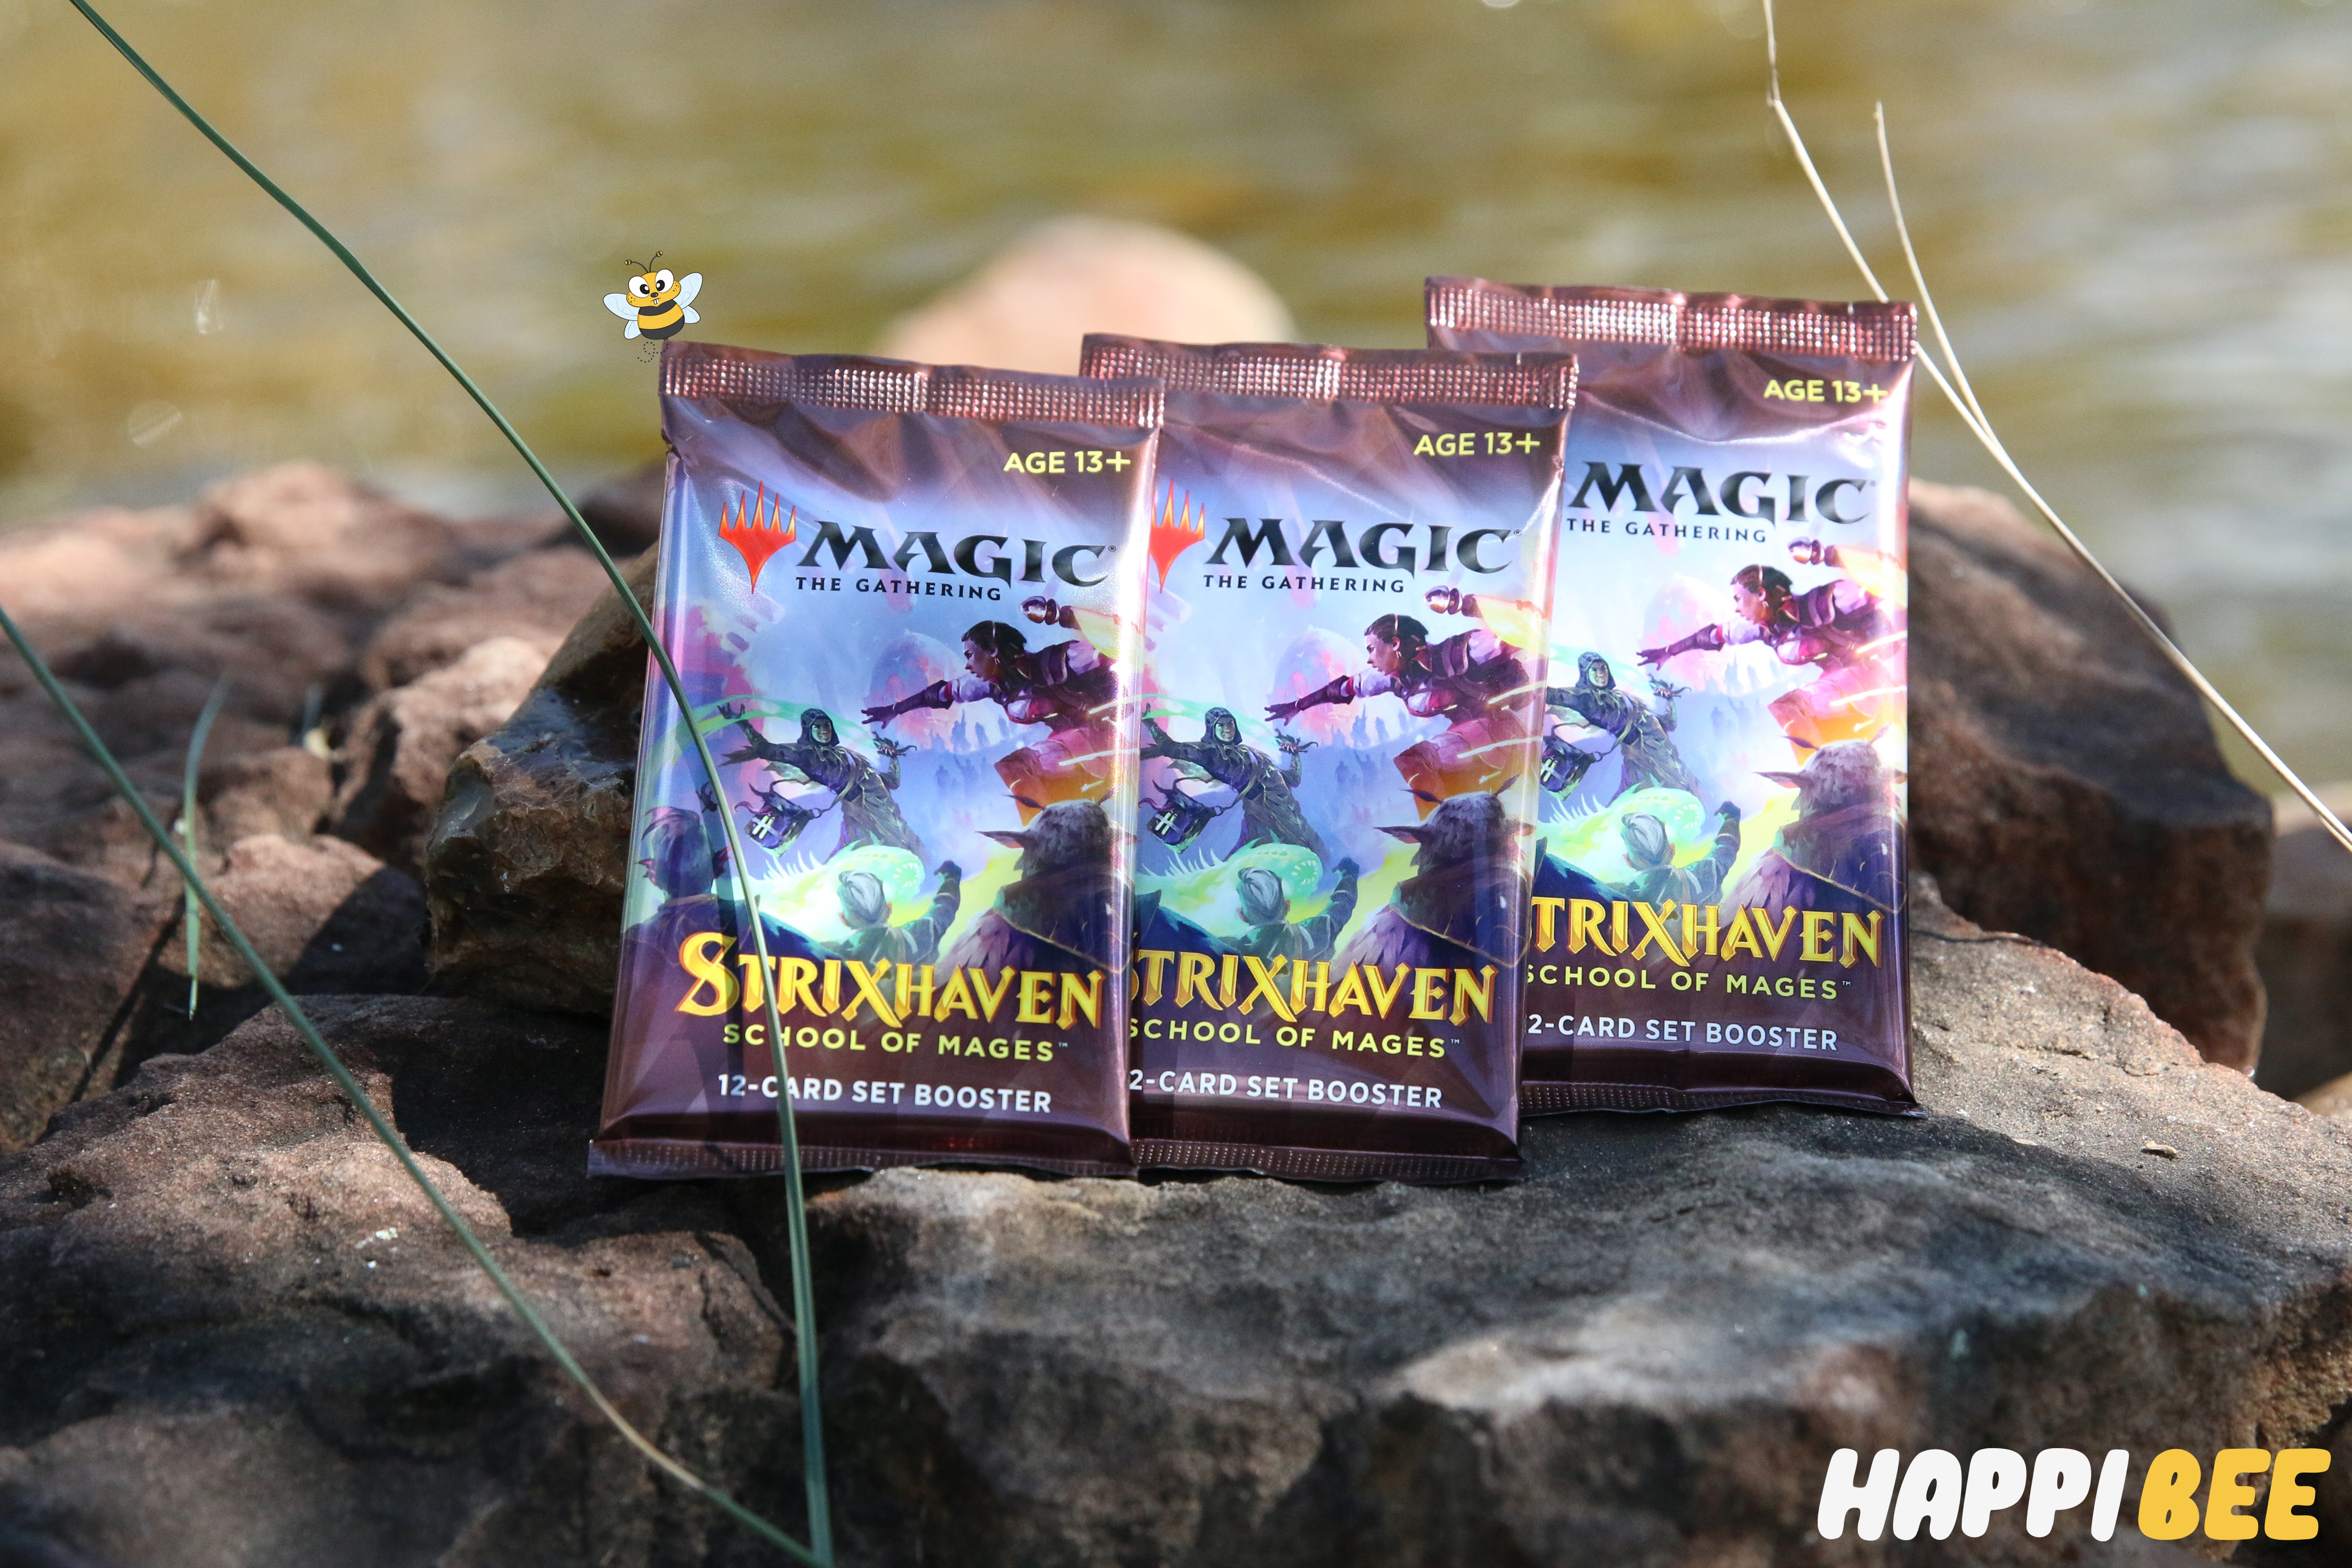 Unleash the Magic: Happibee.me Welcomes Magic The Gathering to its Collection – Top Reasons to Buy Now!